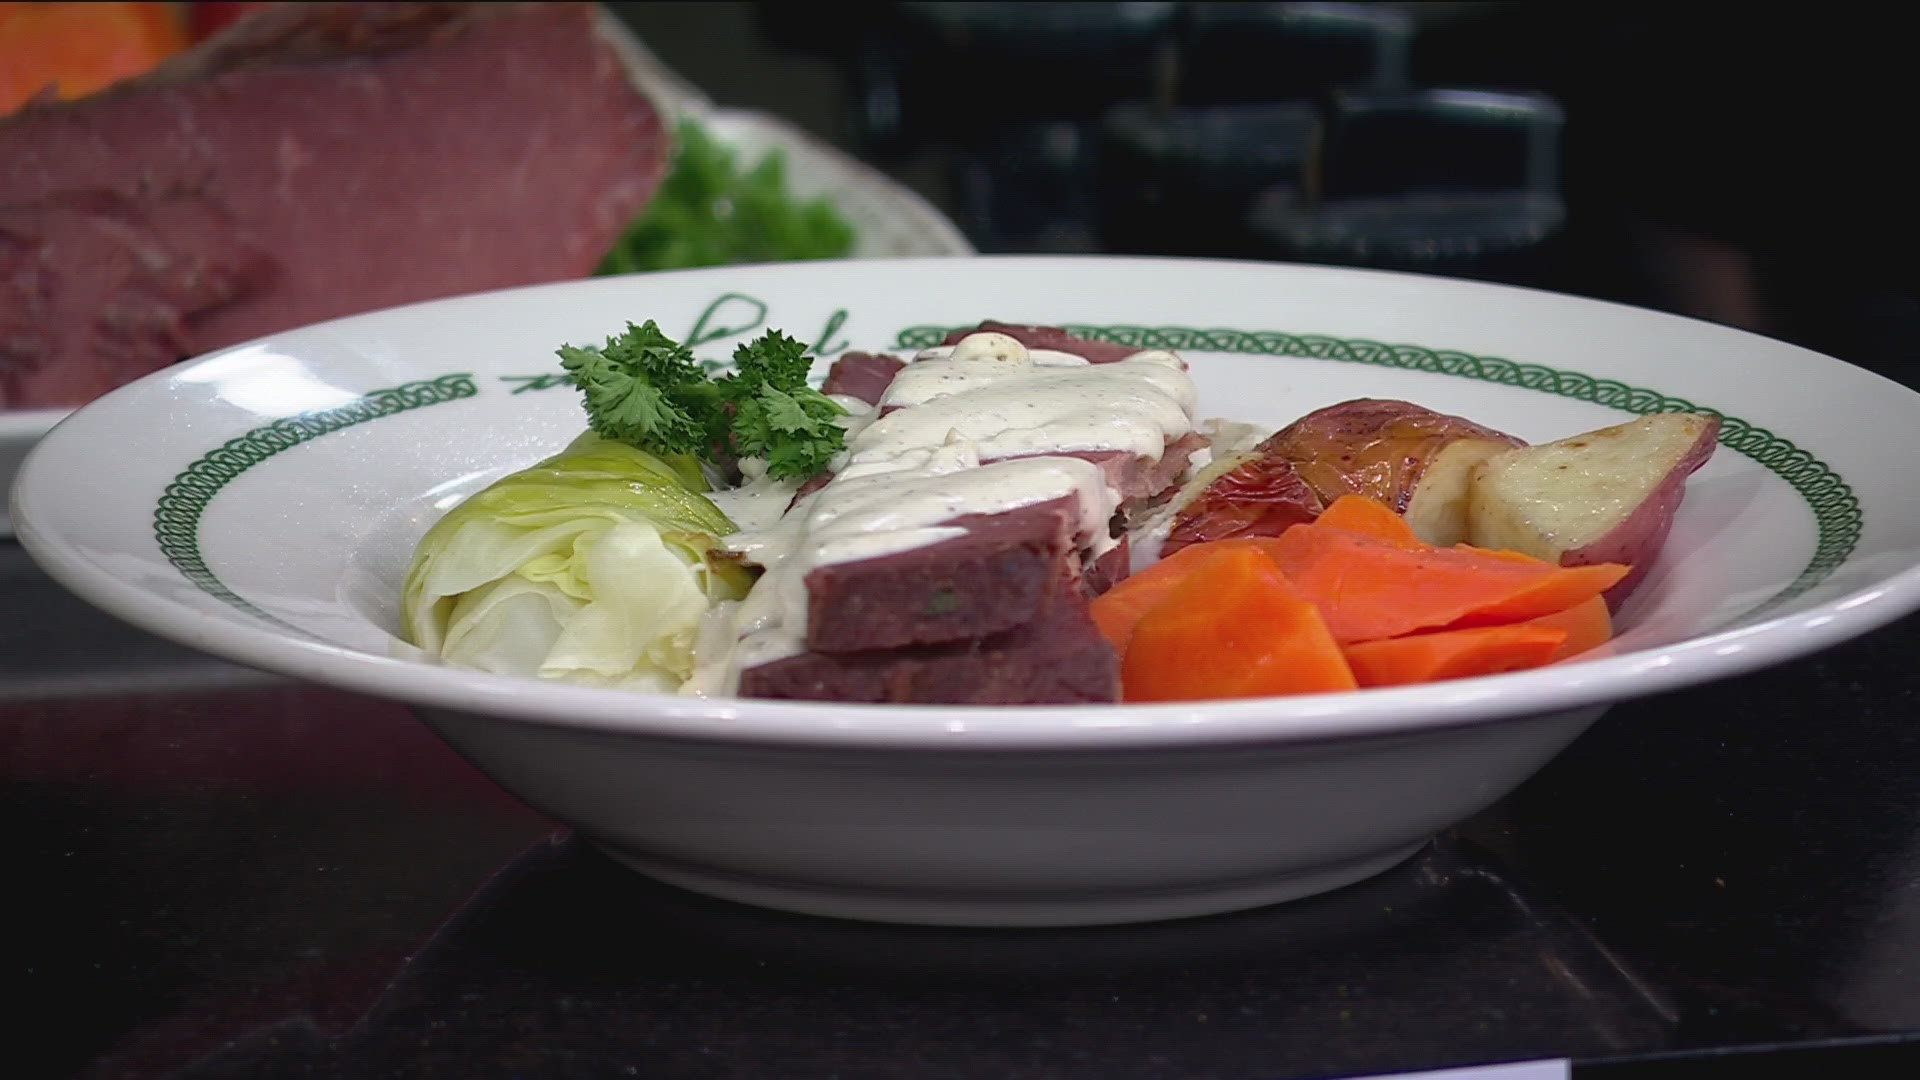 A chef visits KARE 11 Saturday to show us how to make a classic Irish dish for St. Patrick's Day.